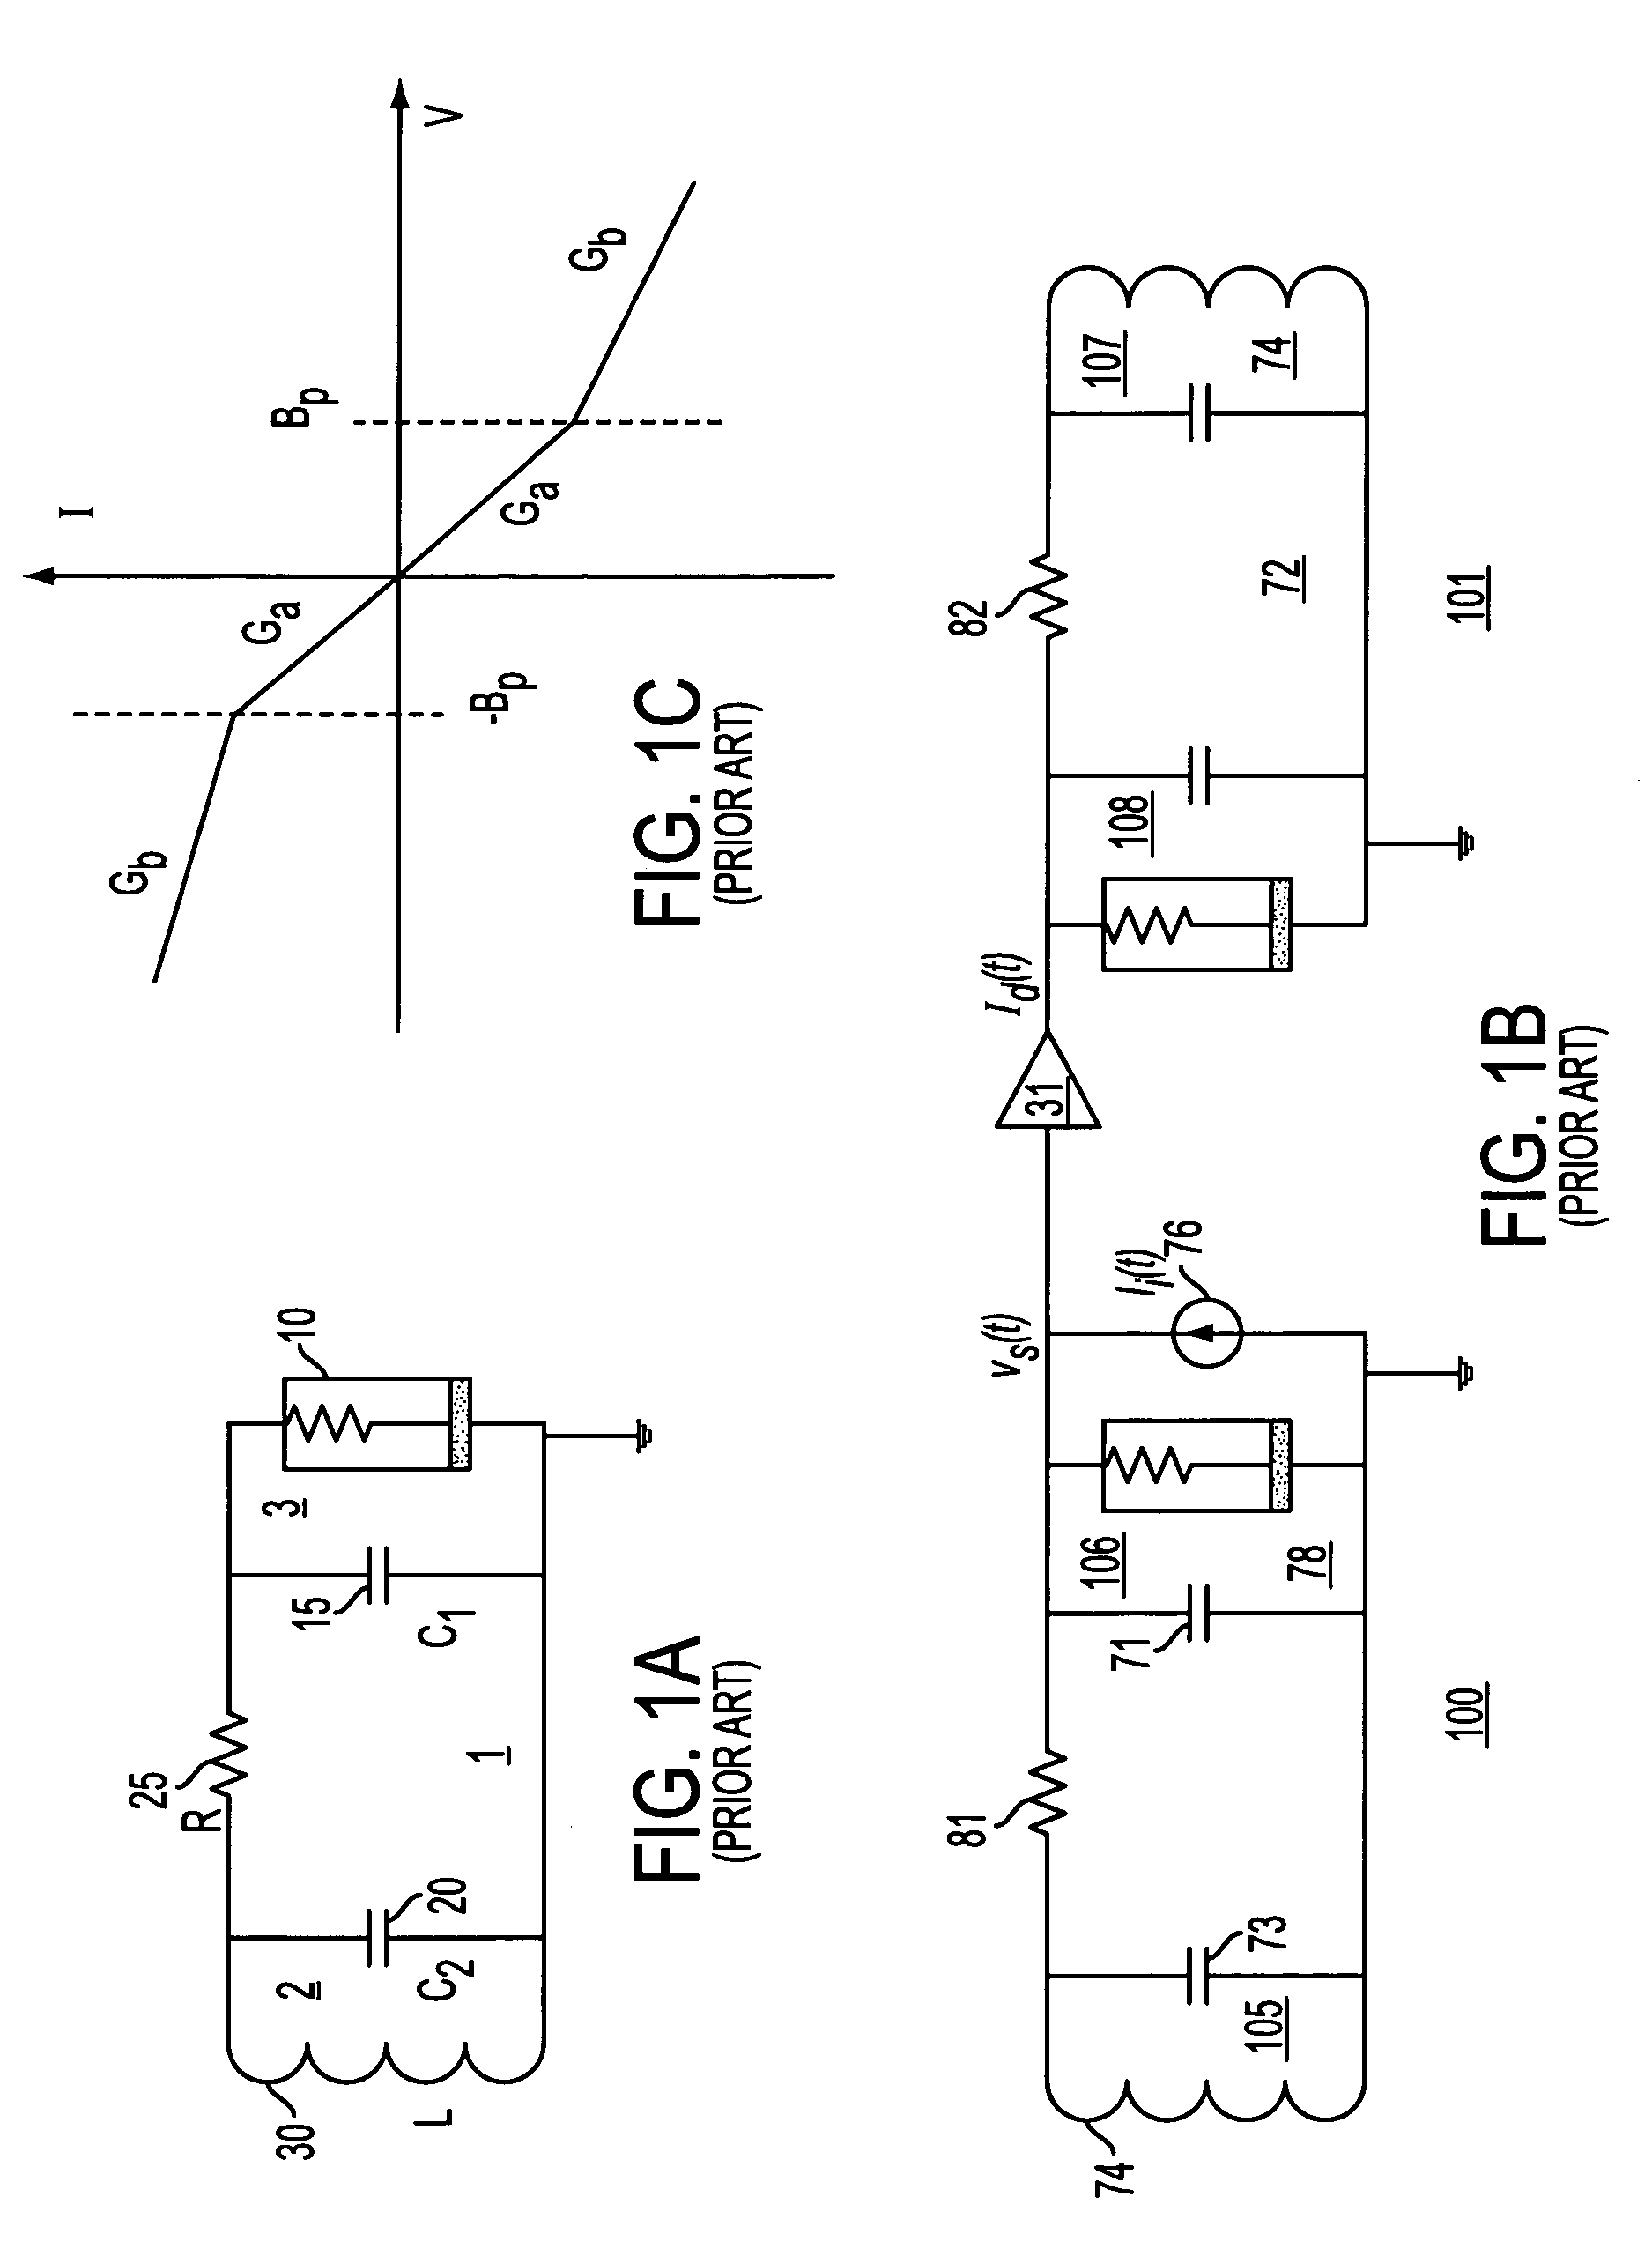 Chaotic communication system and method using modulation of nonreactive circuit elements